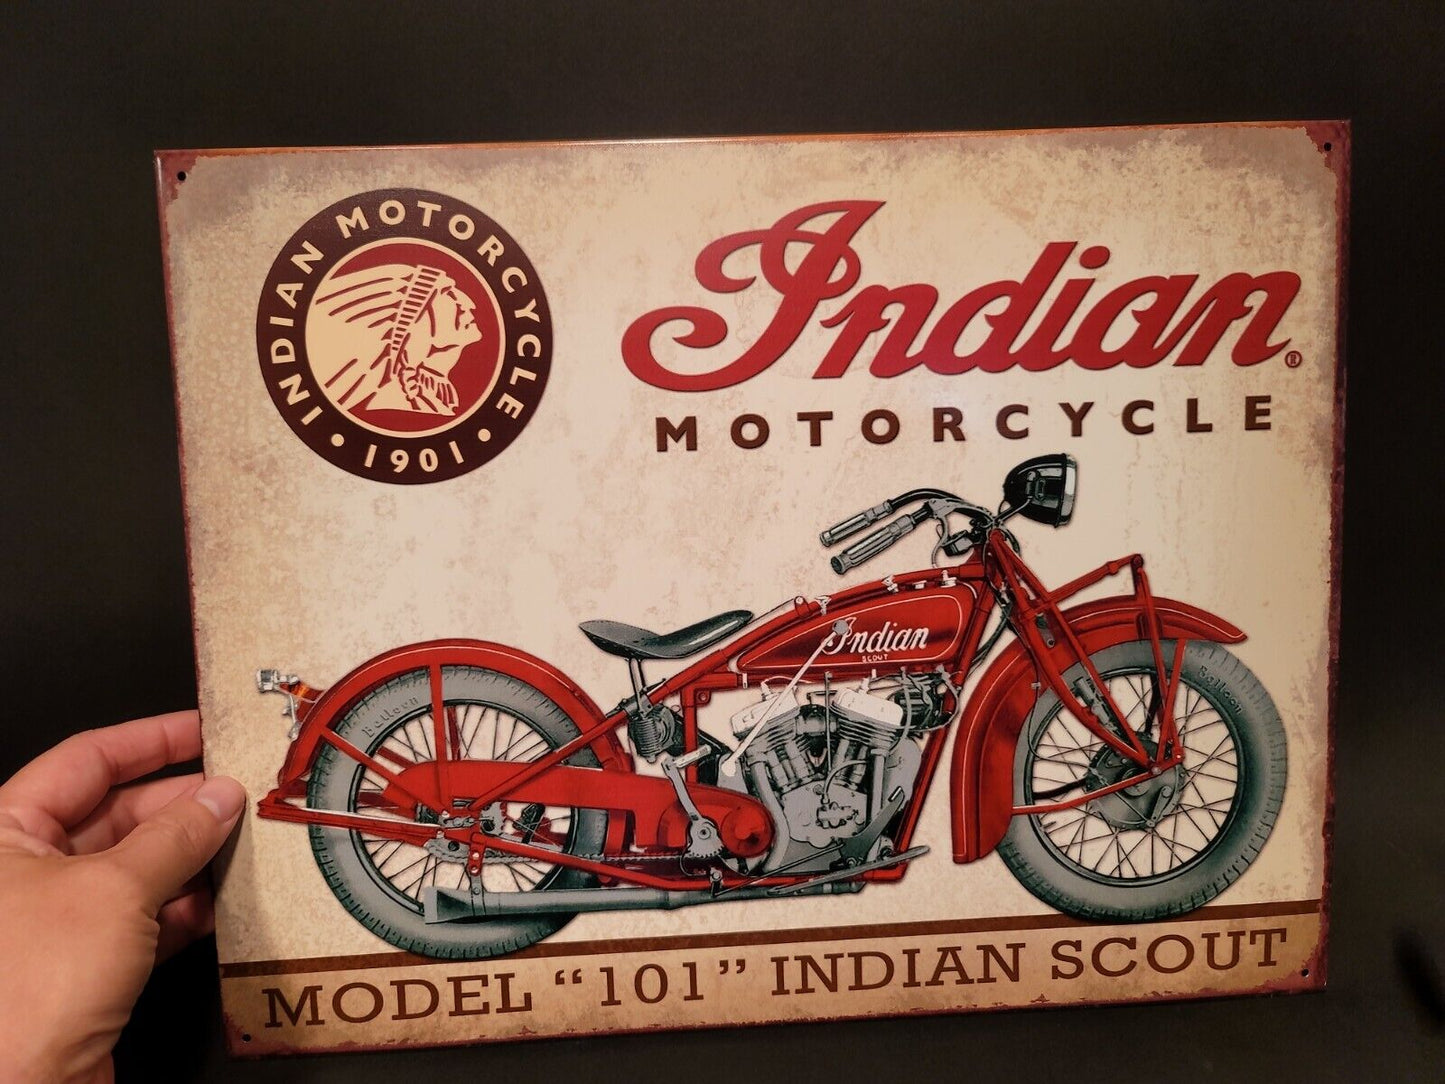 Metal Vintage Style Indian Motorcycle Sign White